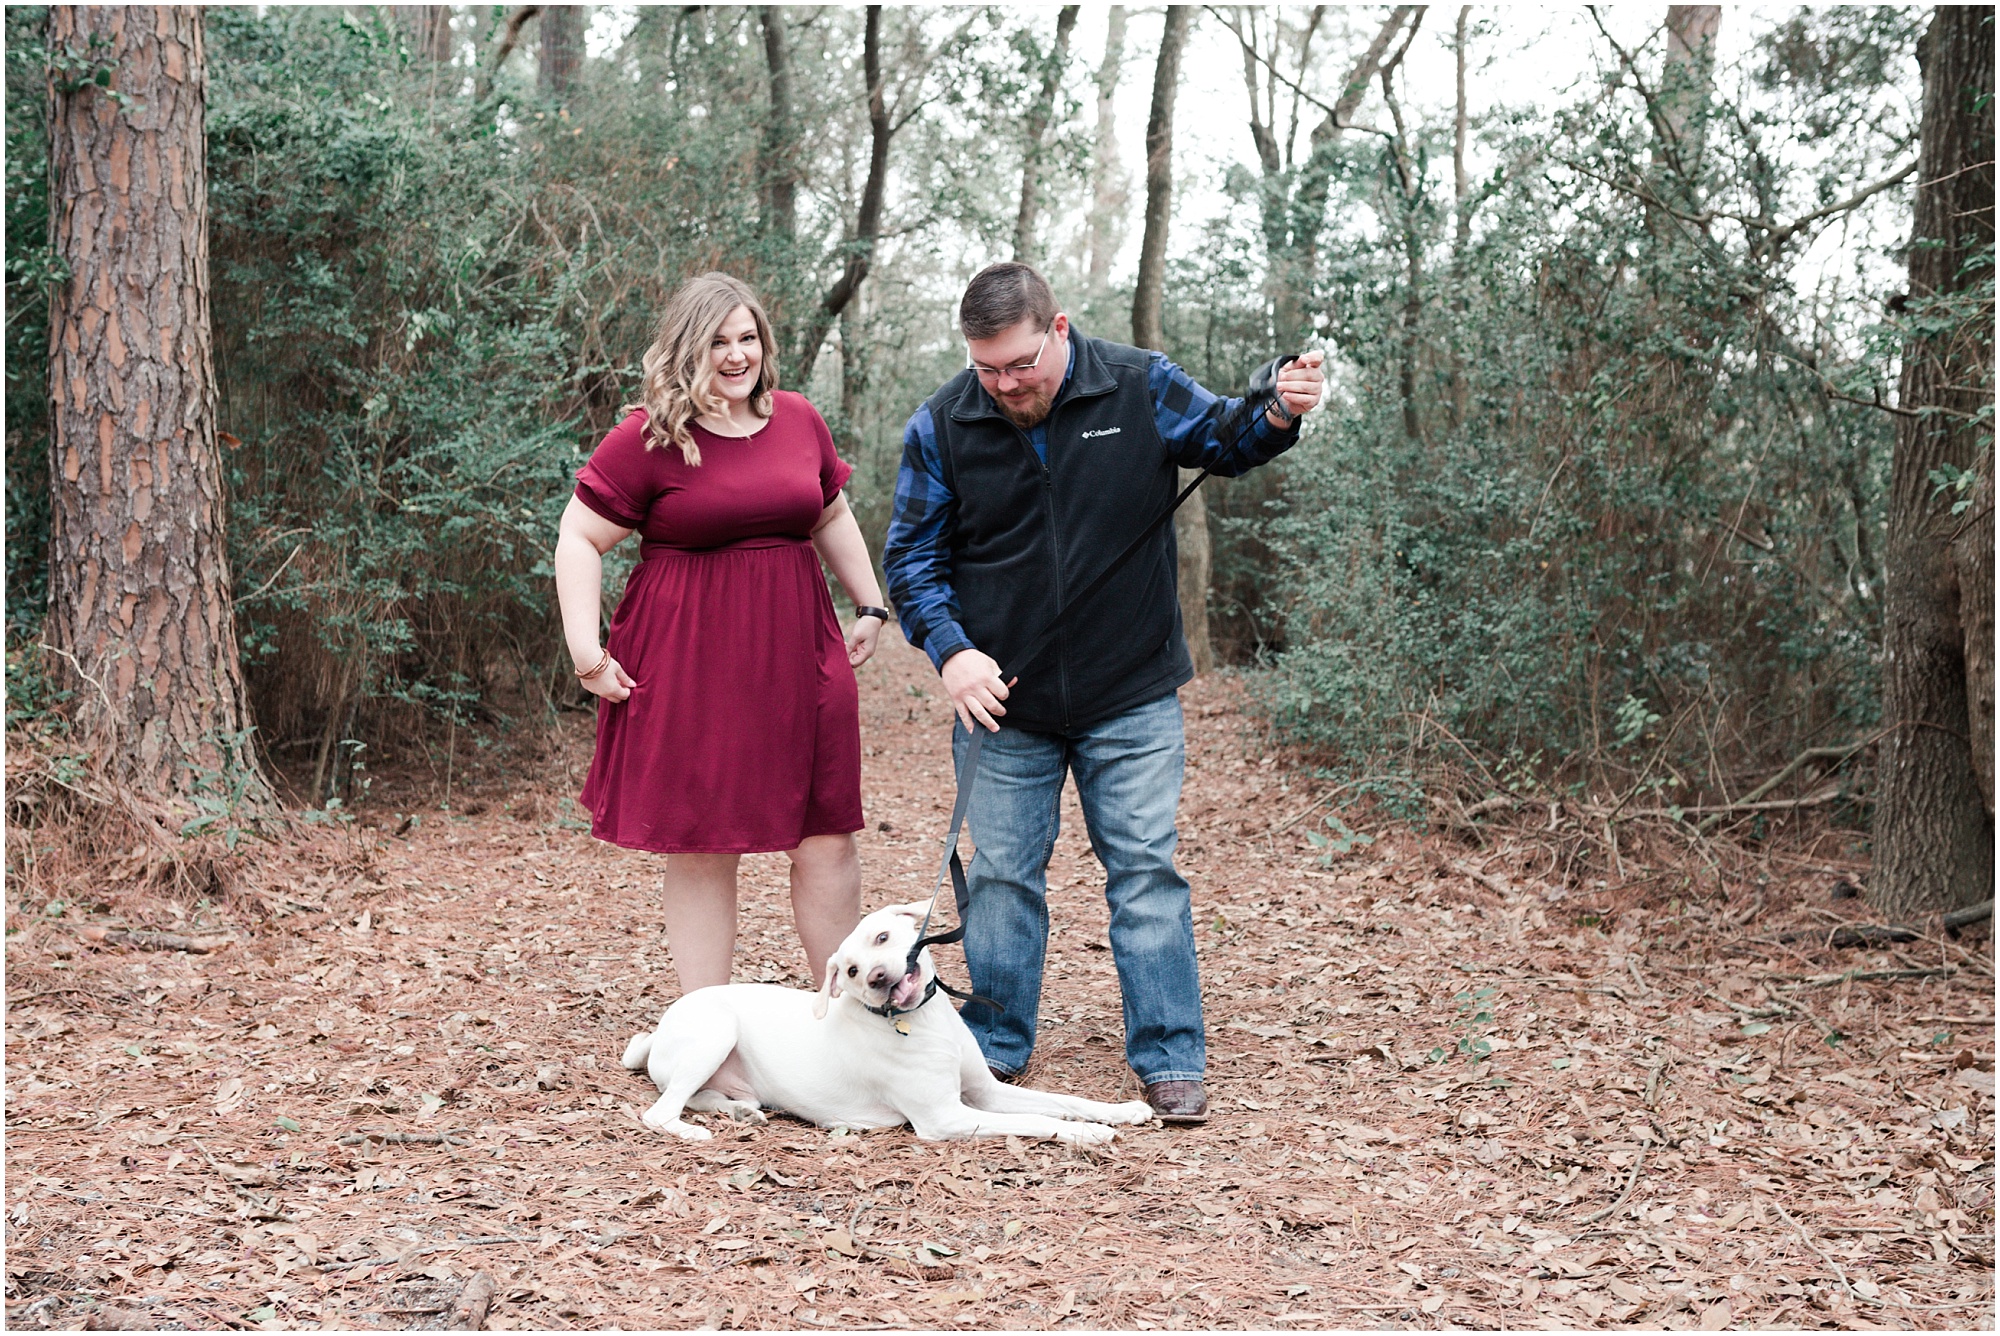 puppy filled engagement session at Christia V Adair Park in Houston, Texas photographed by Swish and Click Photography